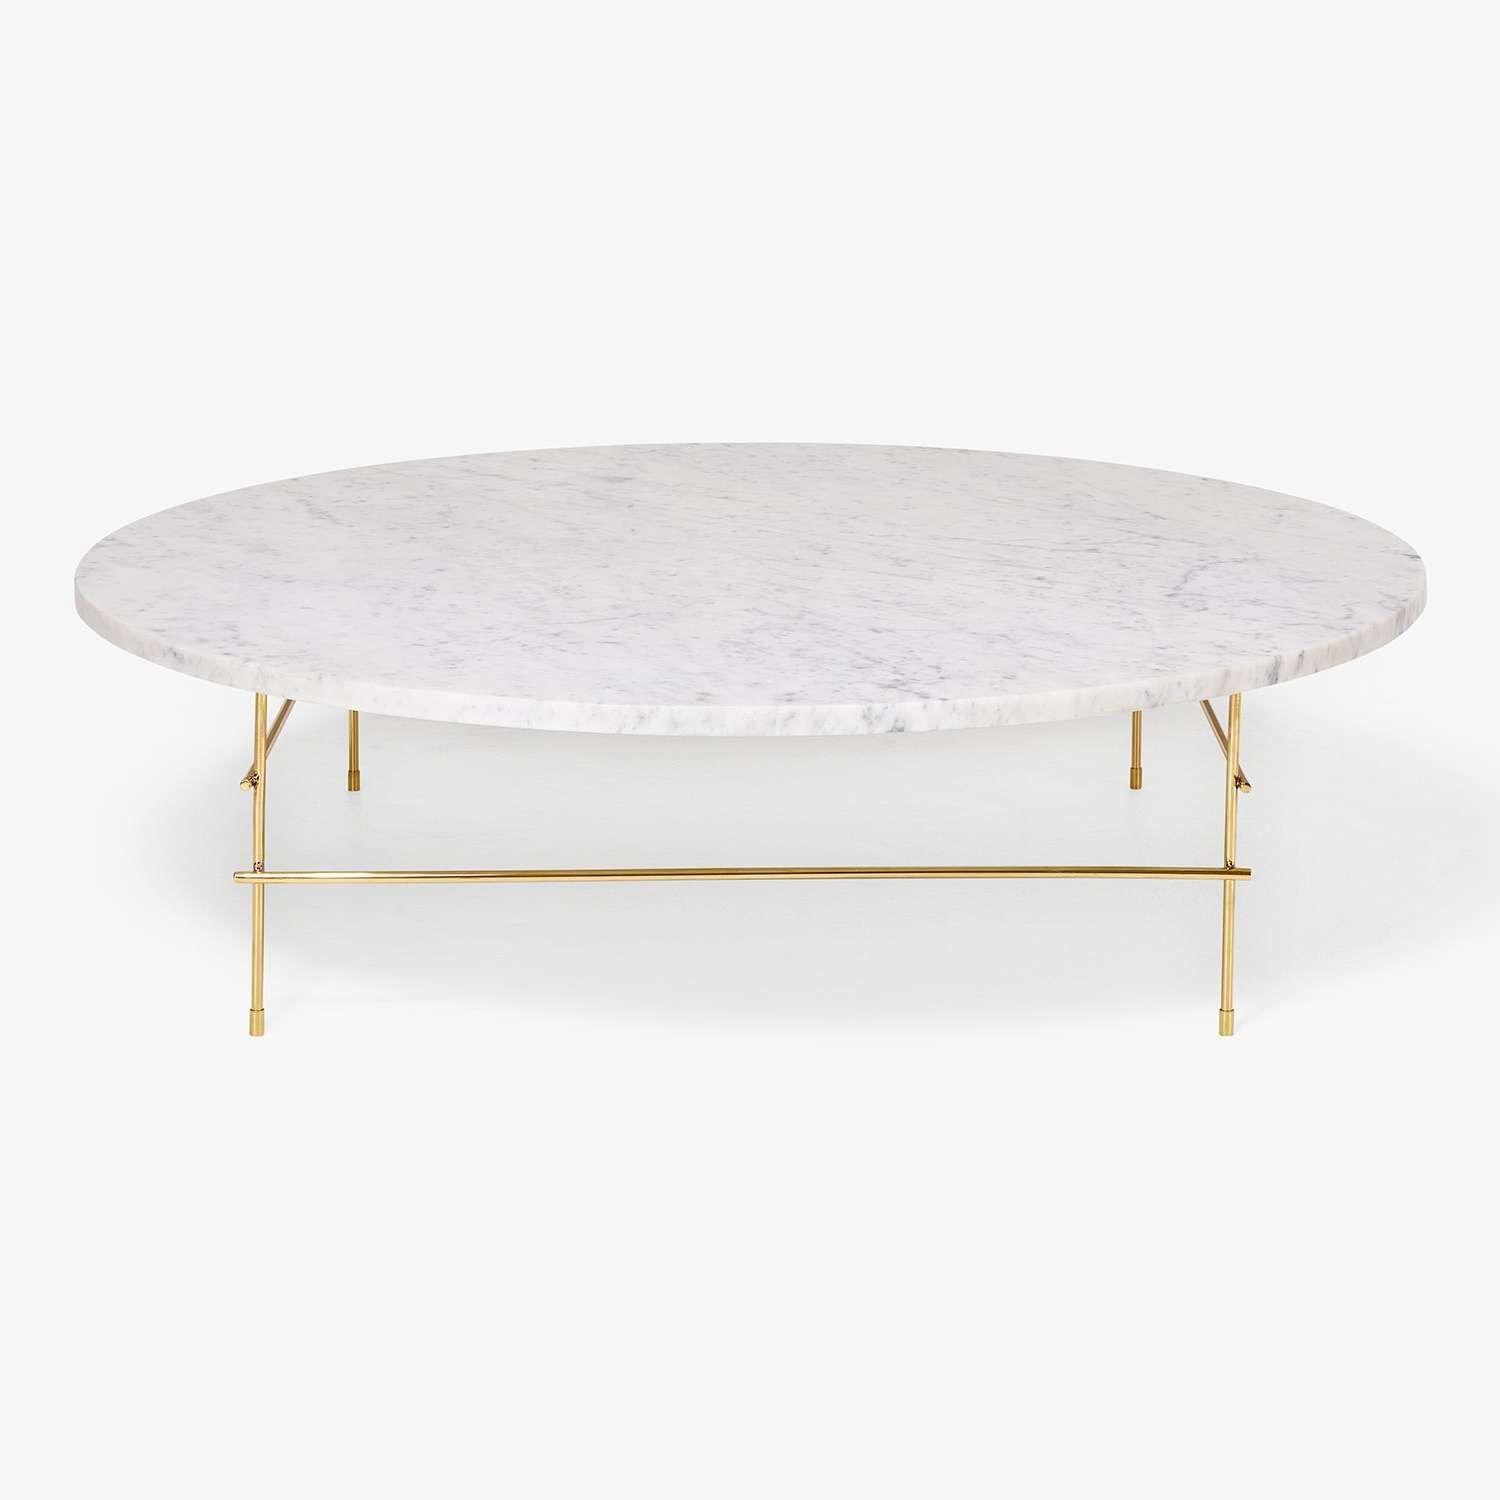 Coffee Tables : Oval White Coffee Table Round Tables Marble Intended For Most Current Oval White Coffee Tables (View 7 of 20)